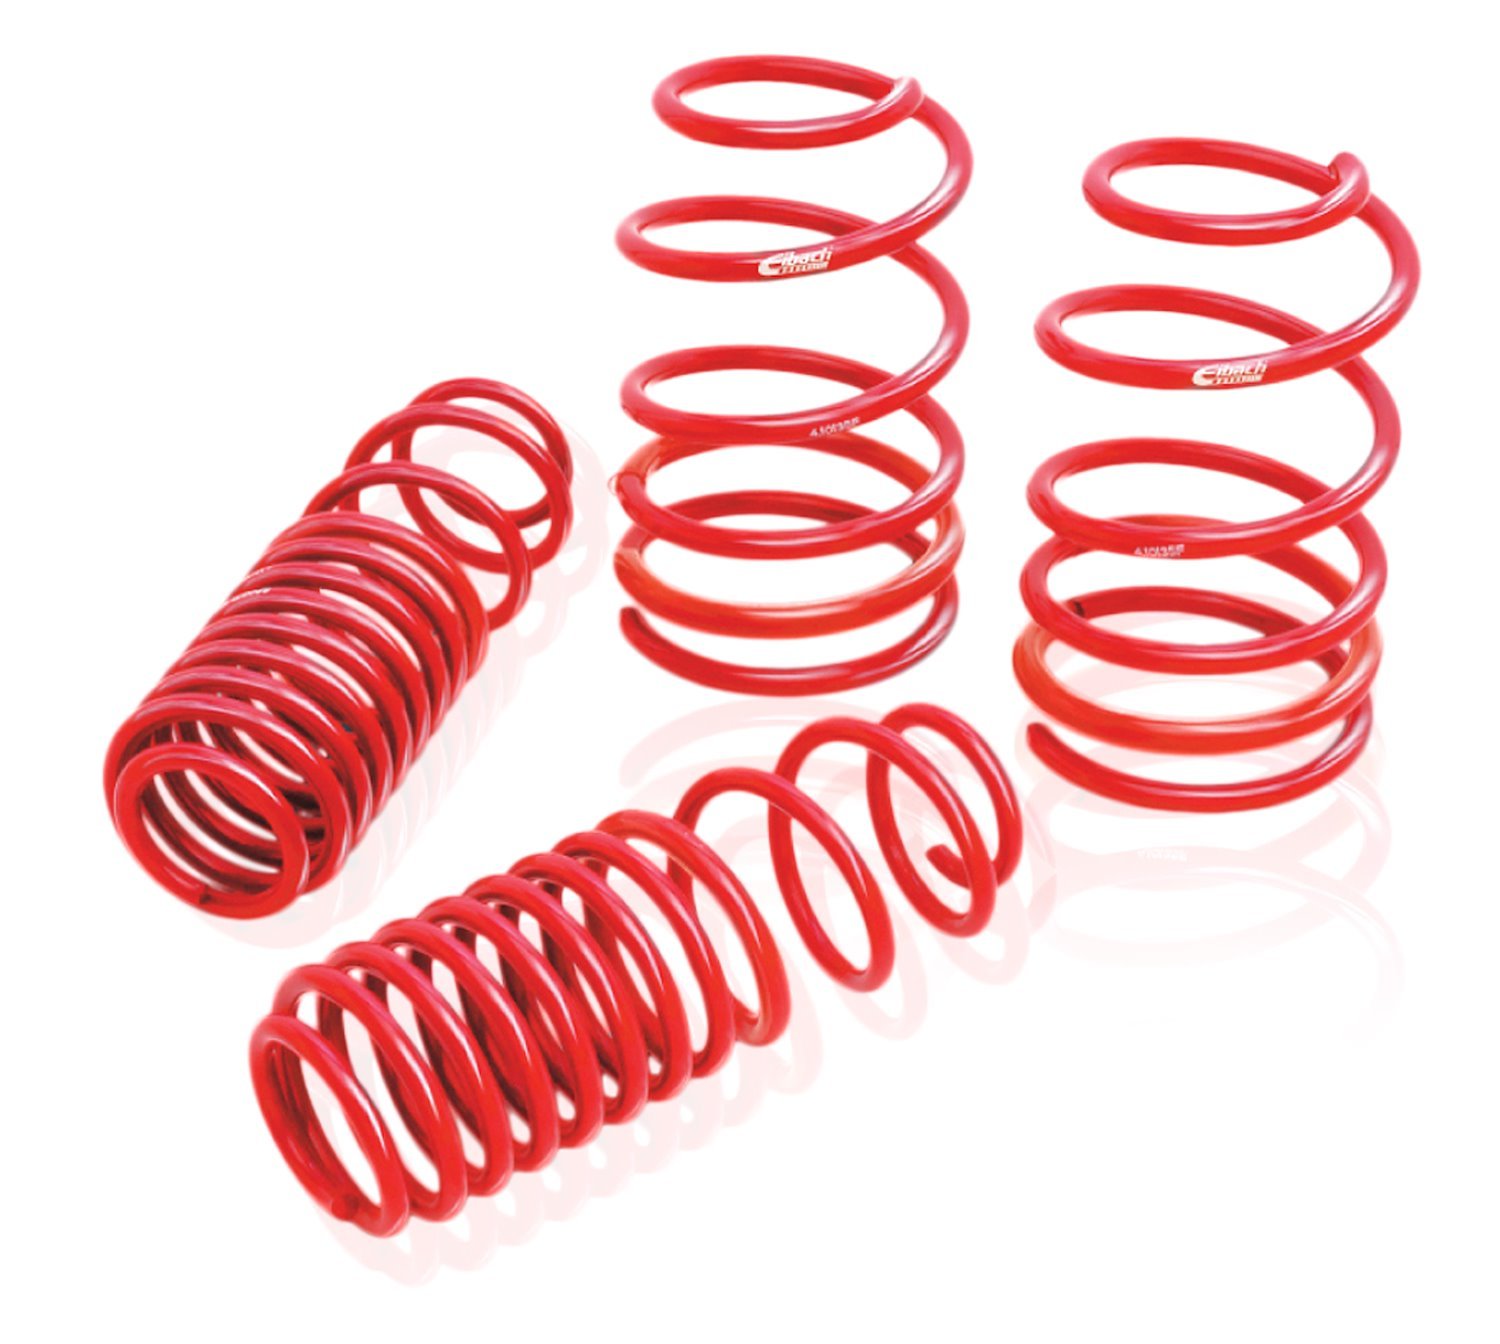 4.14735 Sportline Lowering Springs 2015-16 Mustang V6/EcoBoost Coupe - 1.5" Front/1.3" Rear Drop